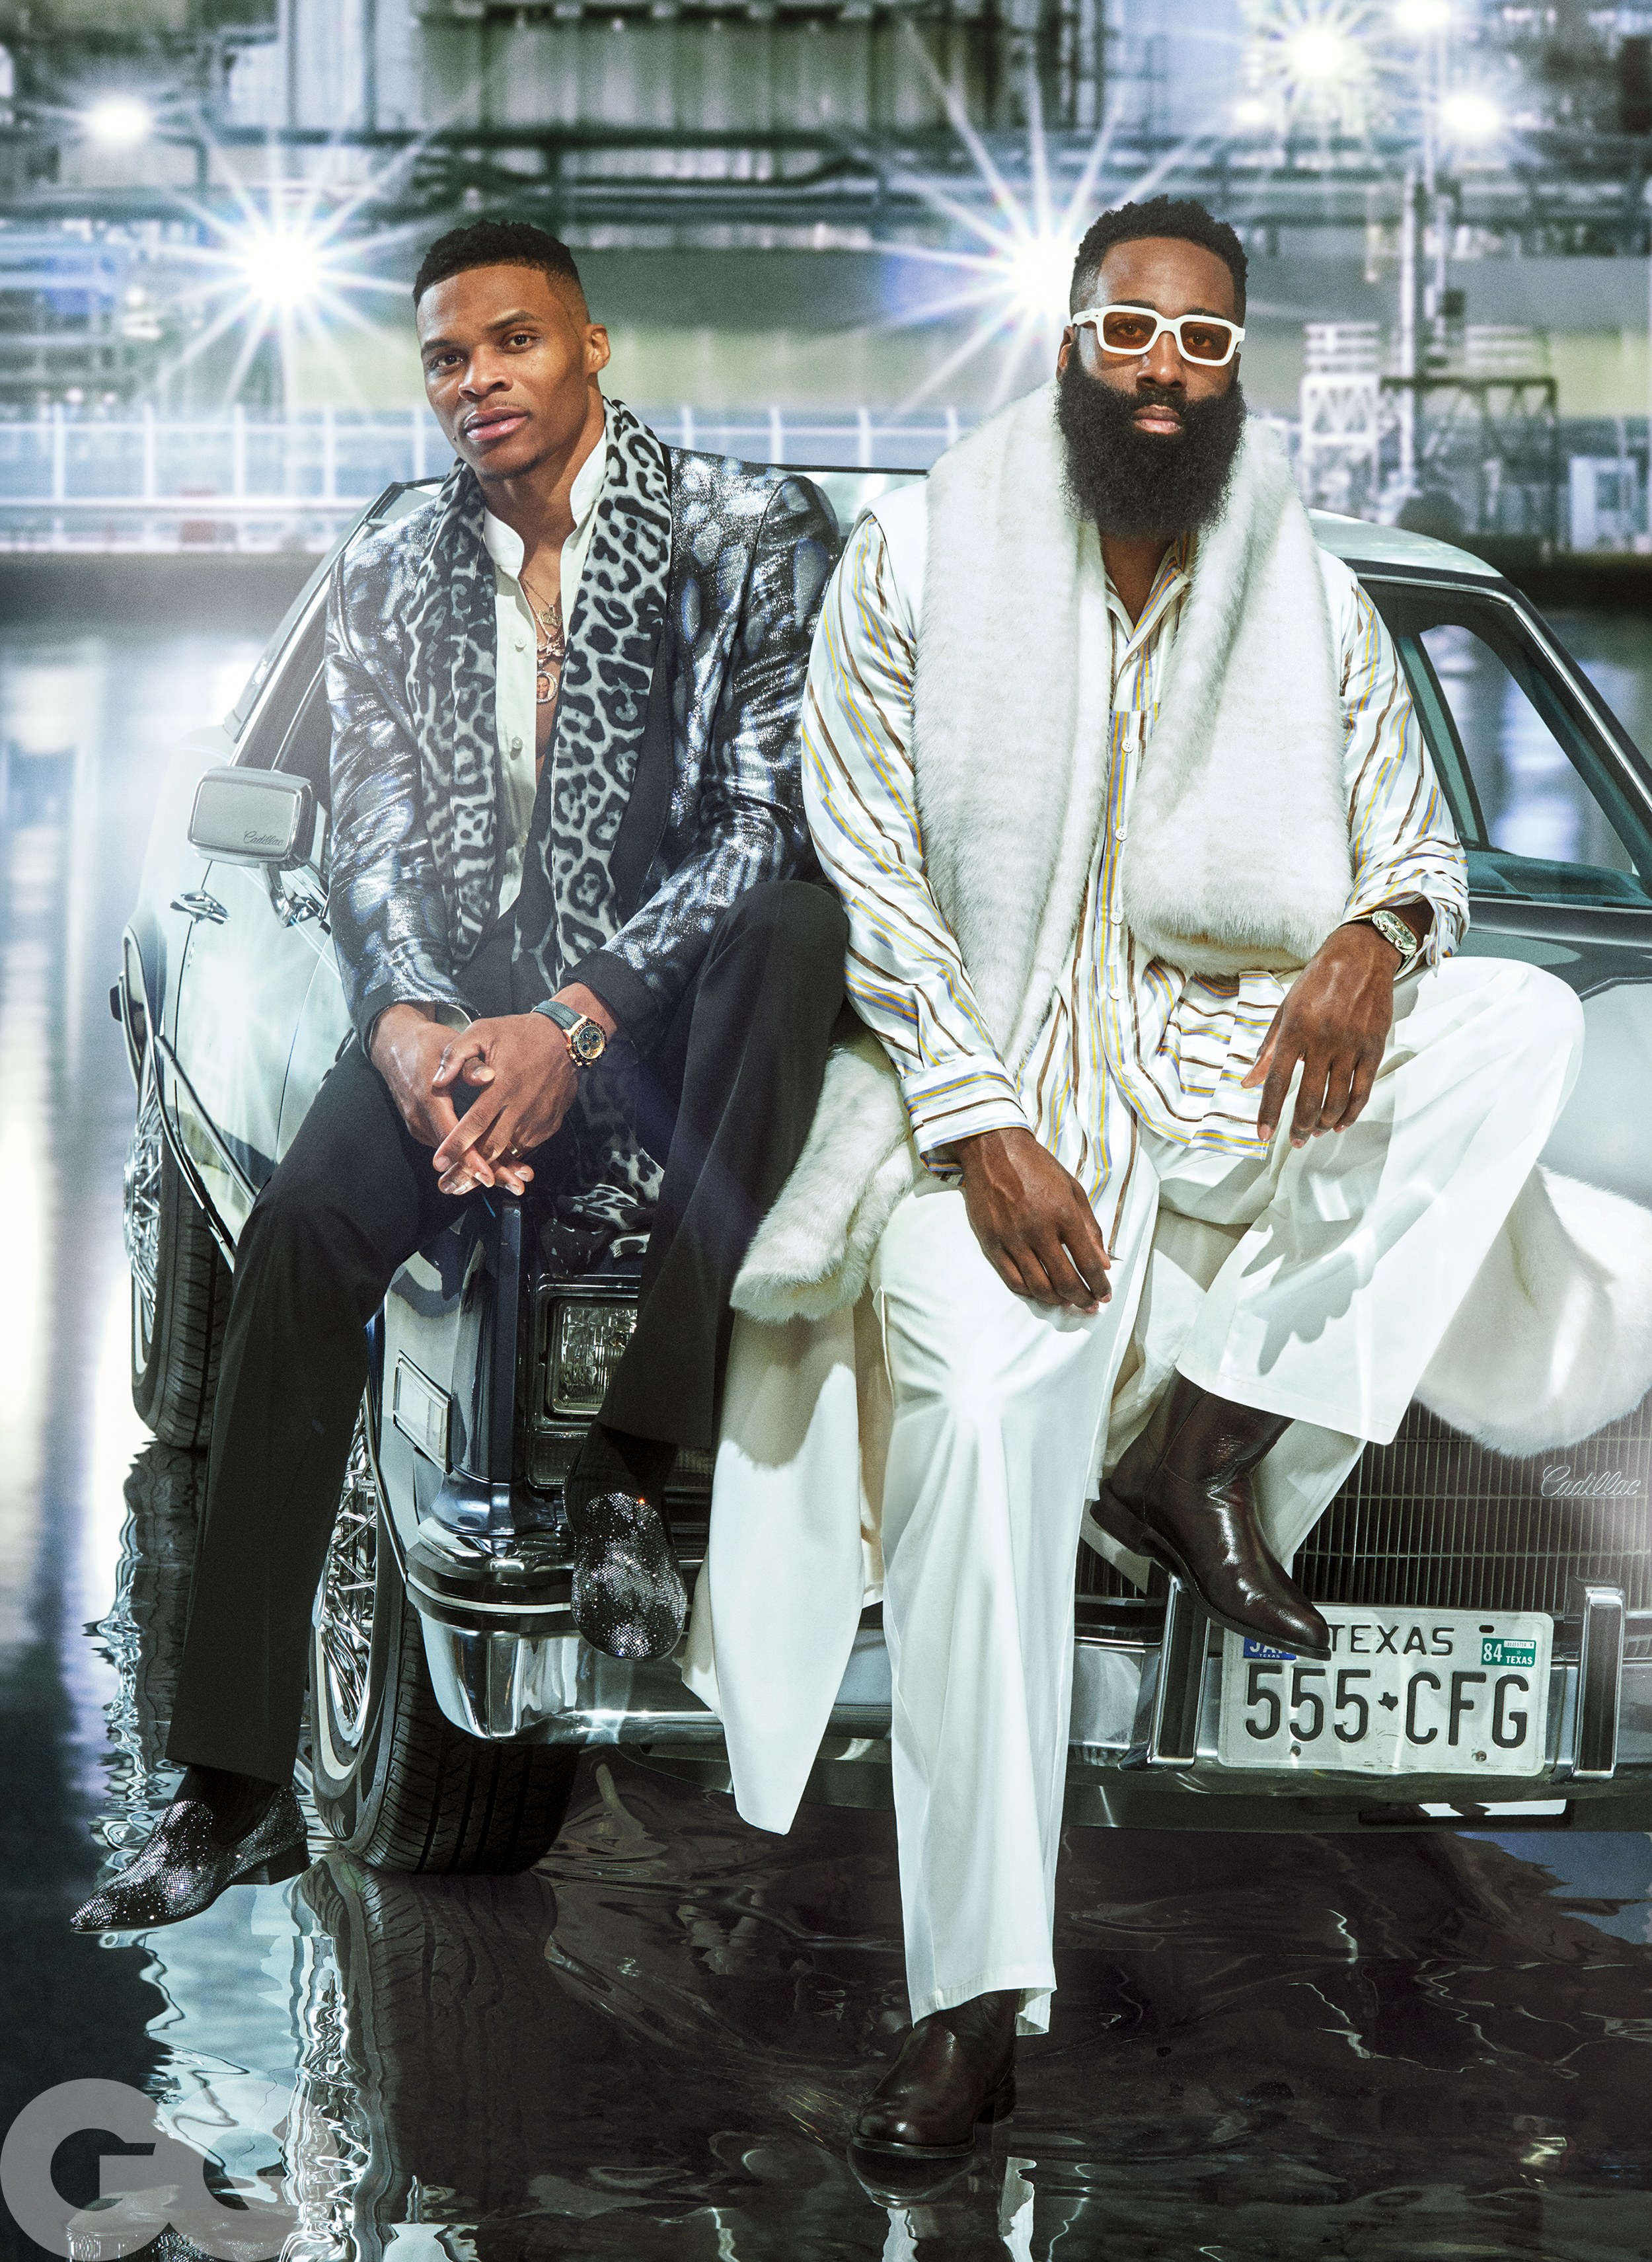 Carl Anka on X: Someone please make a buddy cop film with James Harden  & Russell Westbrook. This @GQMagazine feature is incredible.    / X